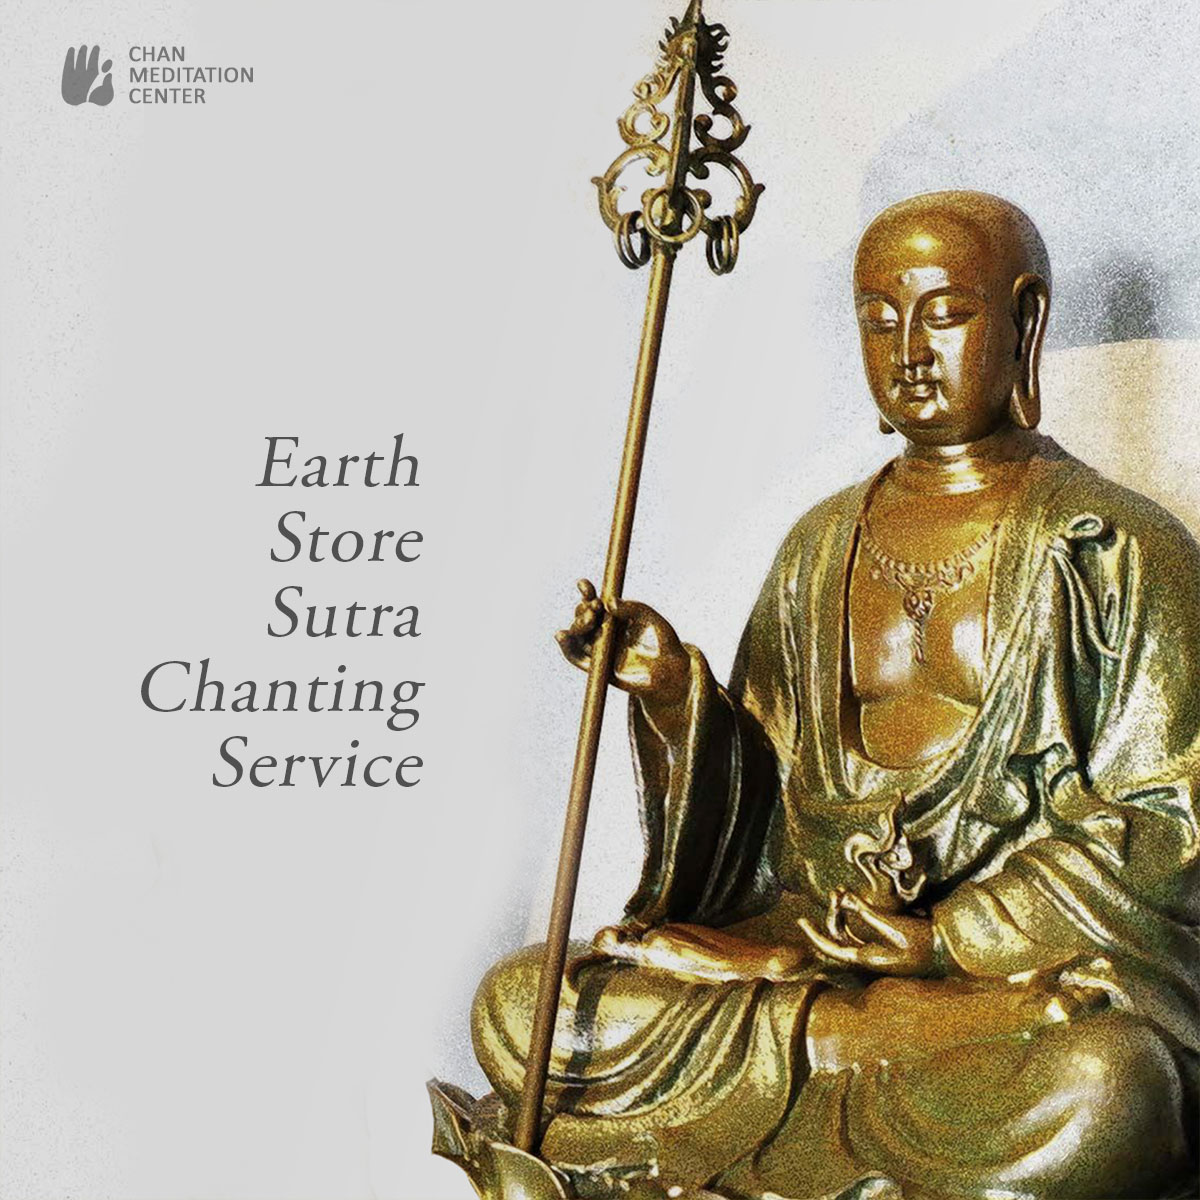 The Earth Store Sutra Chanting Ceremony